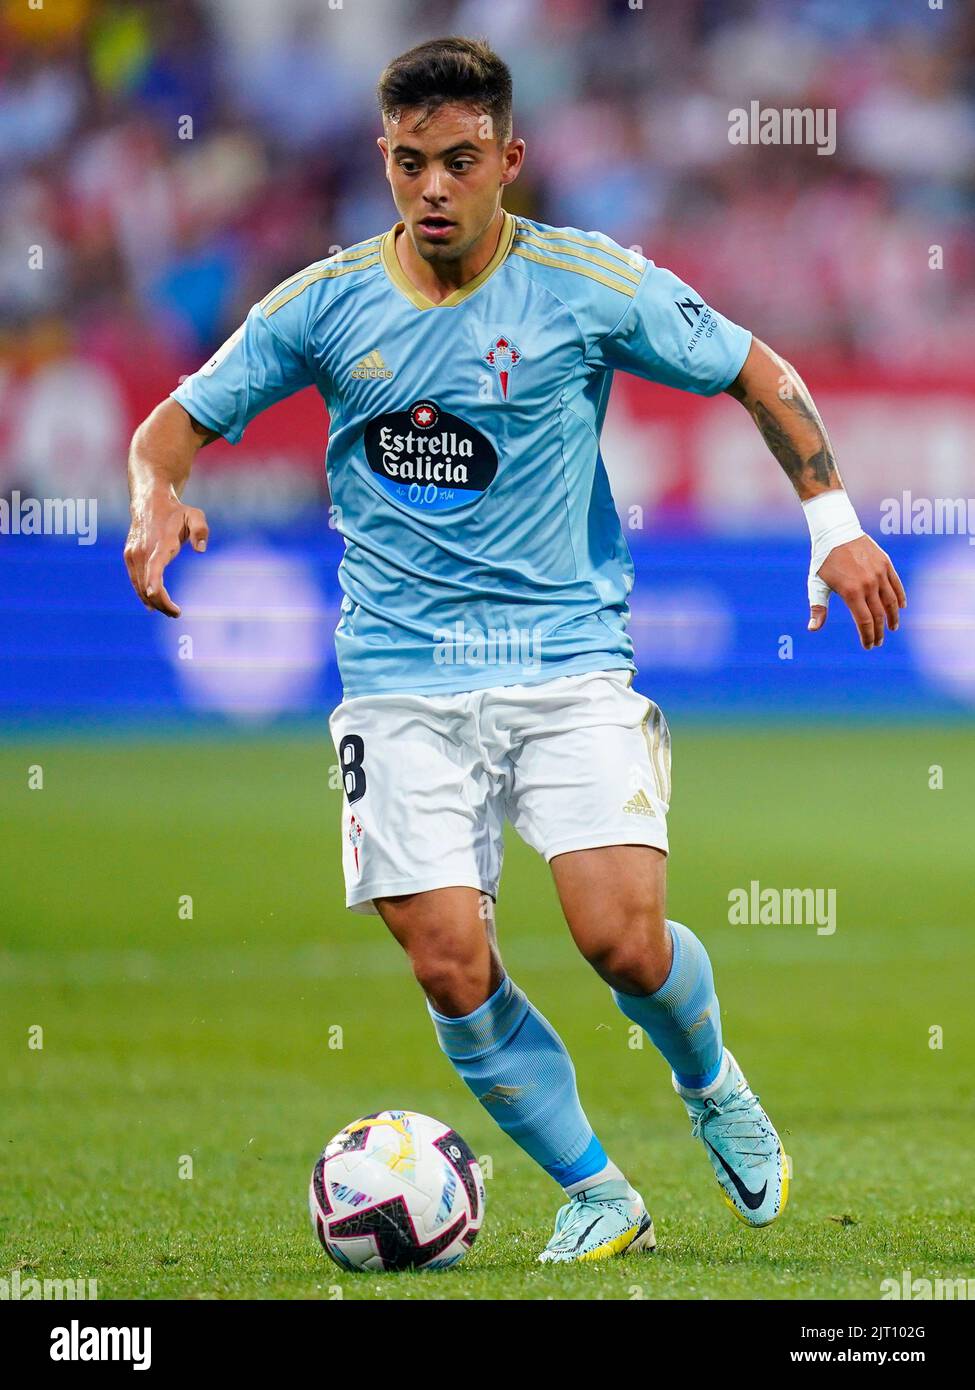 Fran Beltran of RC Celta during the La Liga match between Girona FC and RC Celta played at Montilivi Stadium on August 26, 2022 in Girona, Spain. (Photo by Sergio Ruiz / PRESSIN) Stock Photo